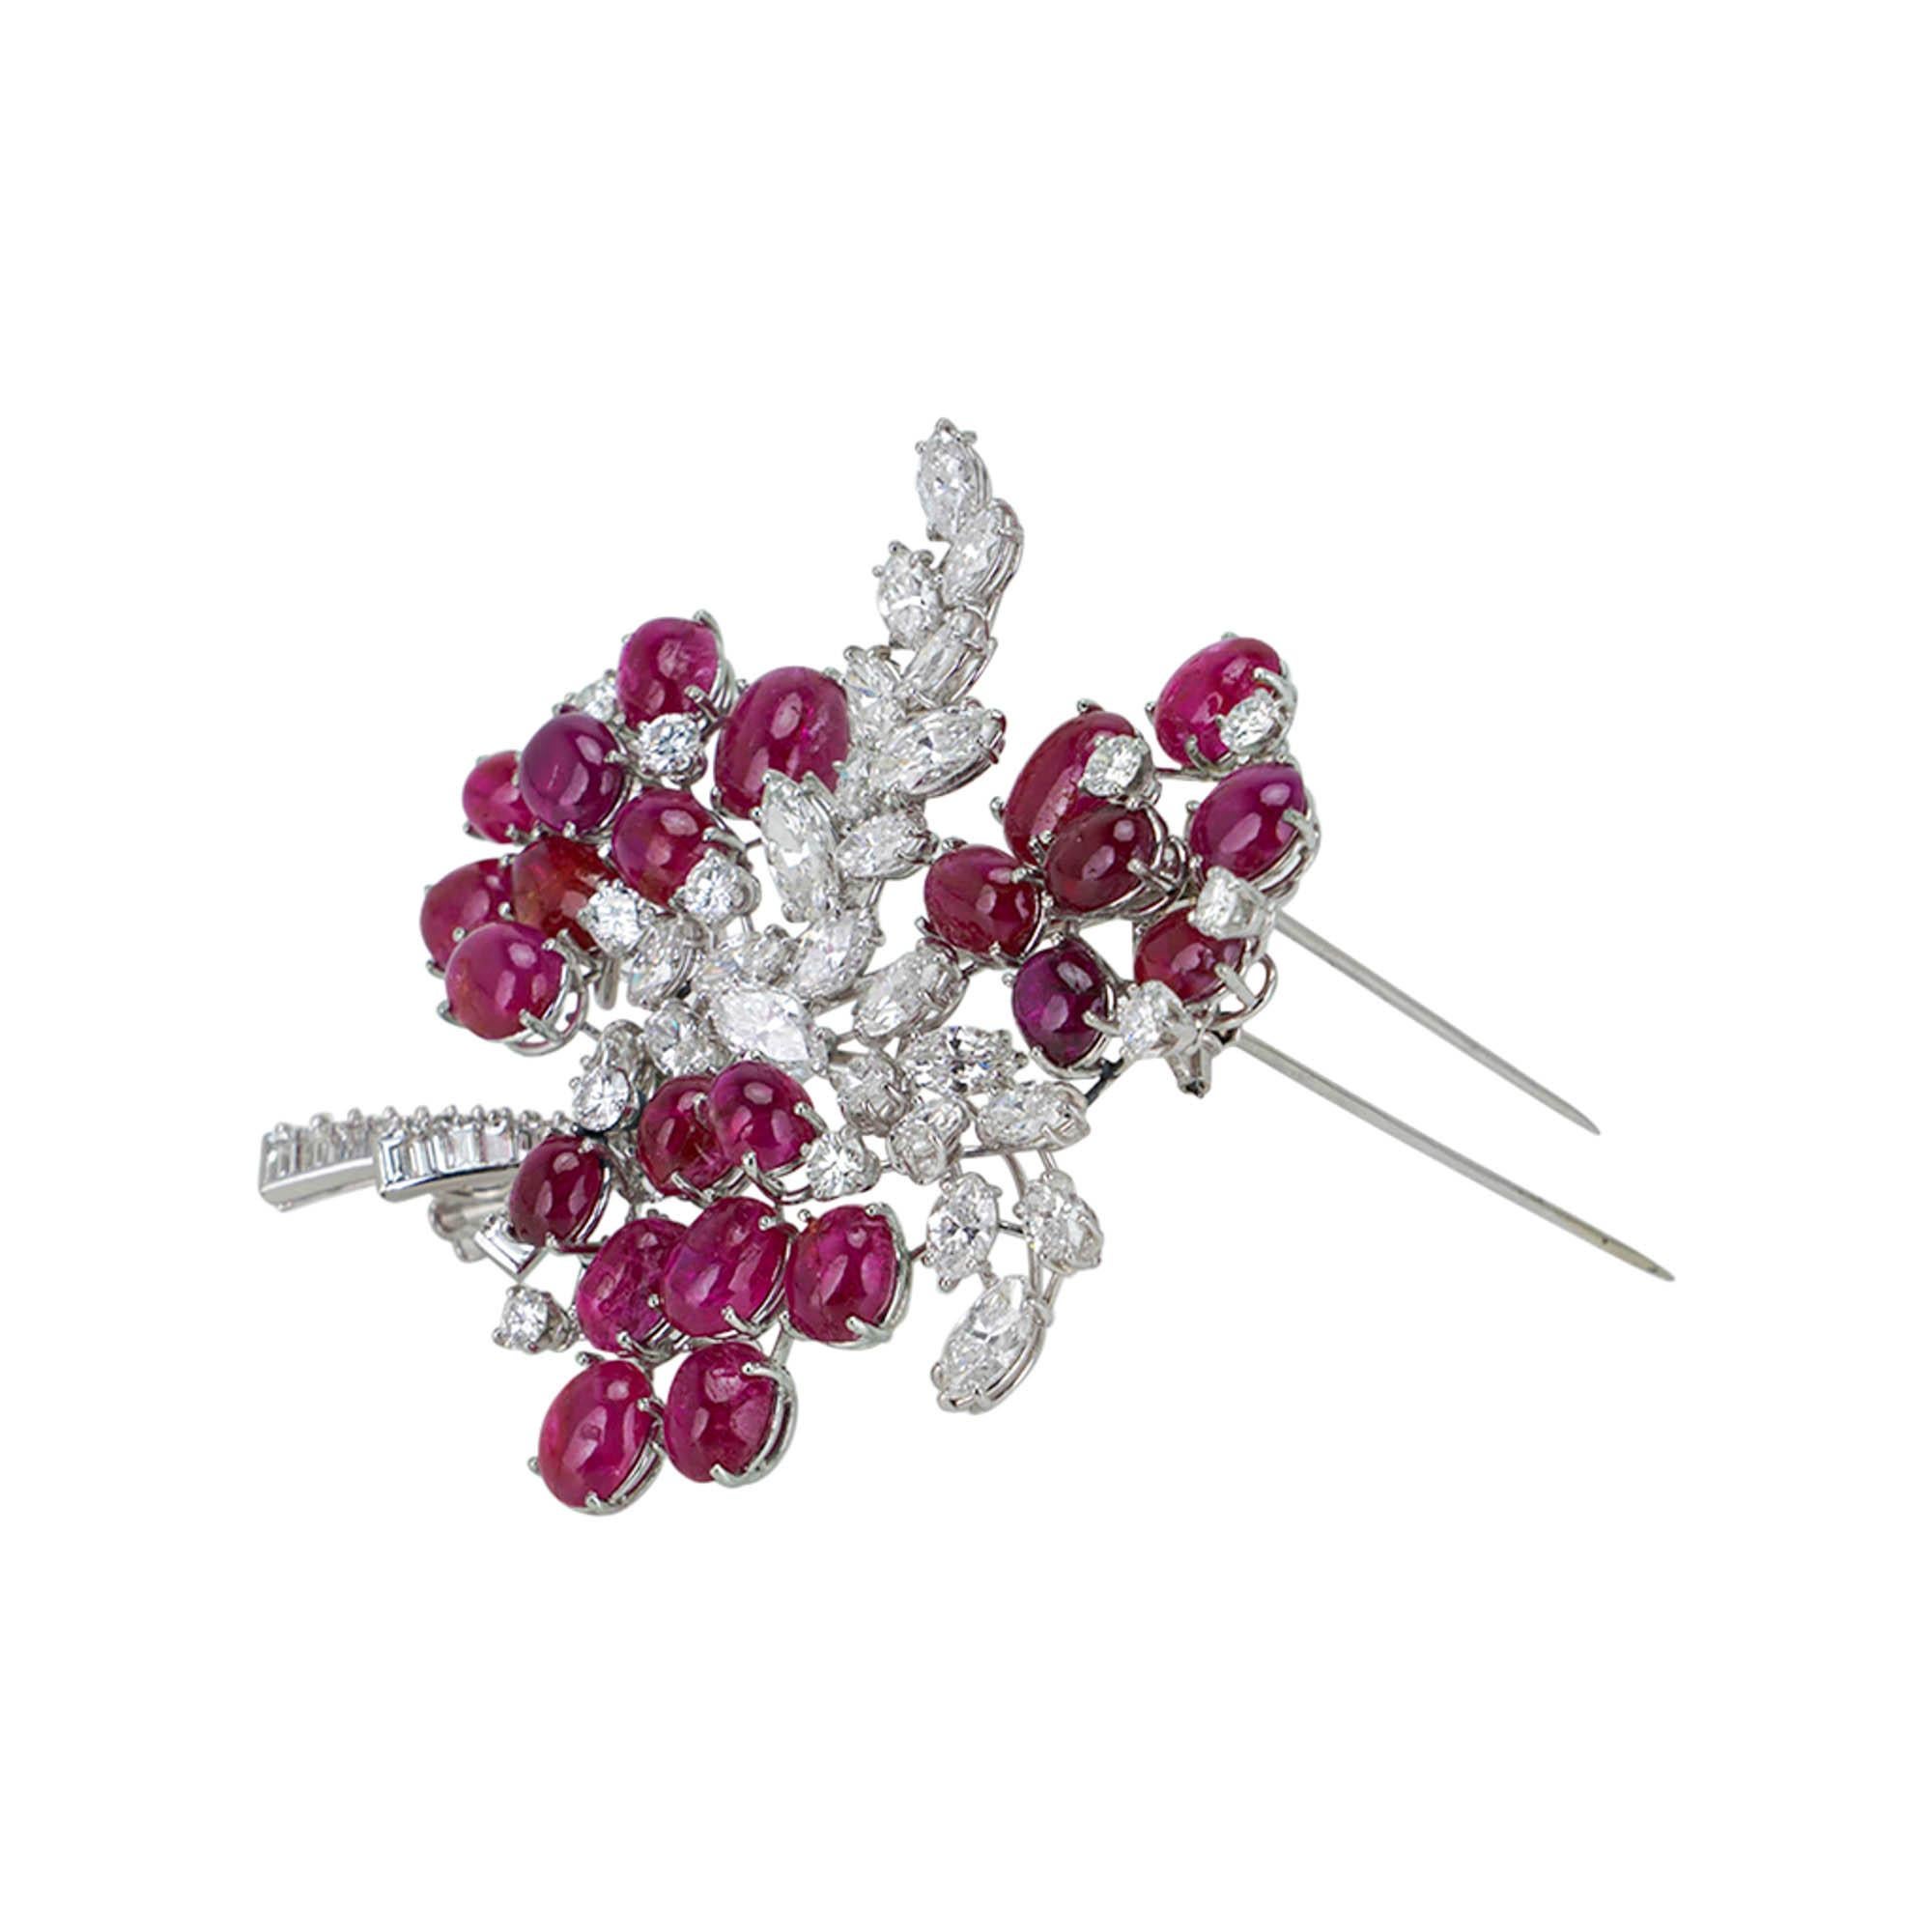 Diamond and Ruby Platinum Setting Vintage Brooch Floral Design In Excellent Condition For Sale In Miami, FL